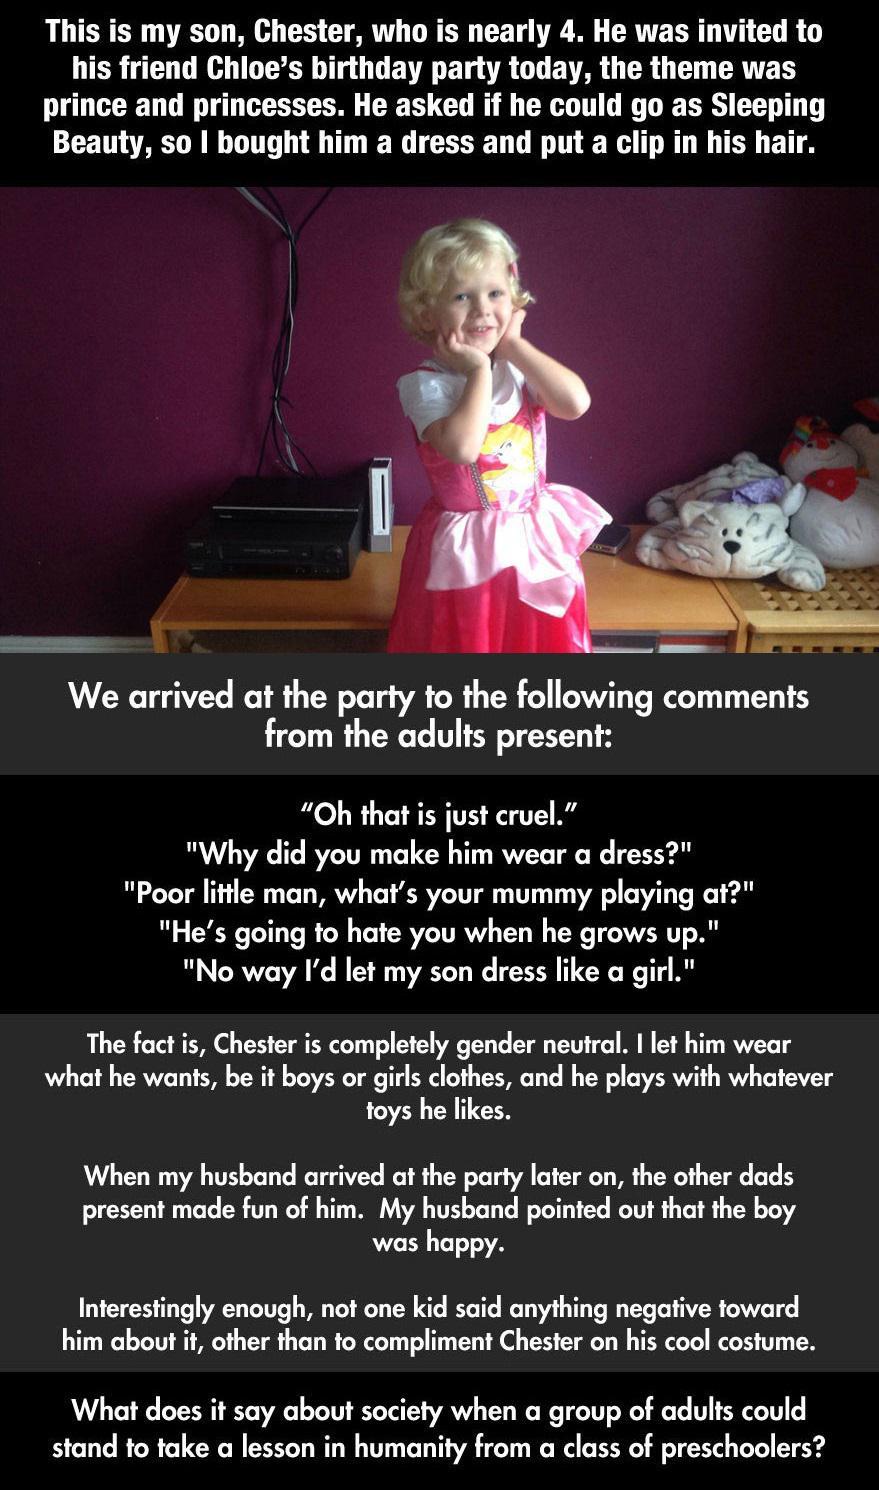 these little kids can teach adults a thing or two, little boy dressed as a princess